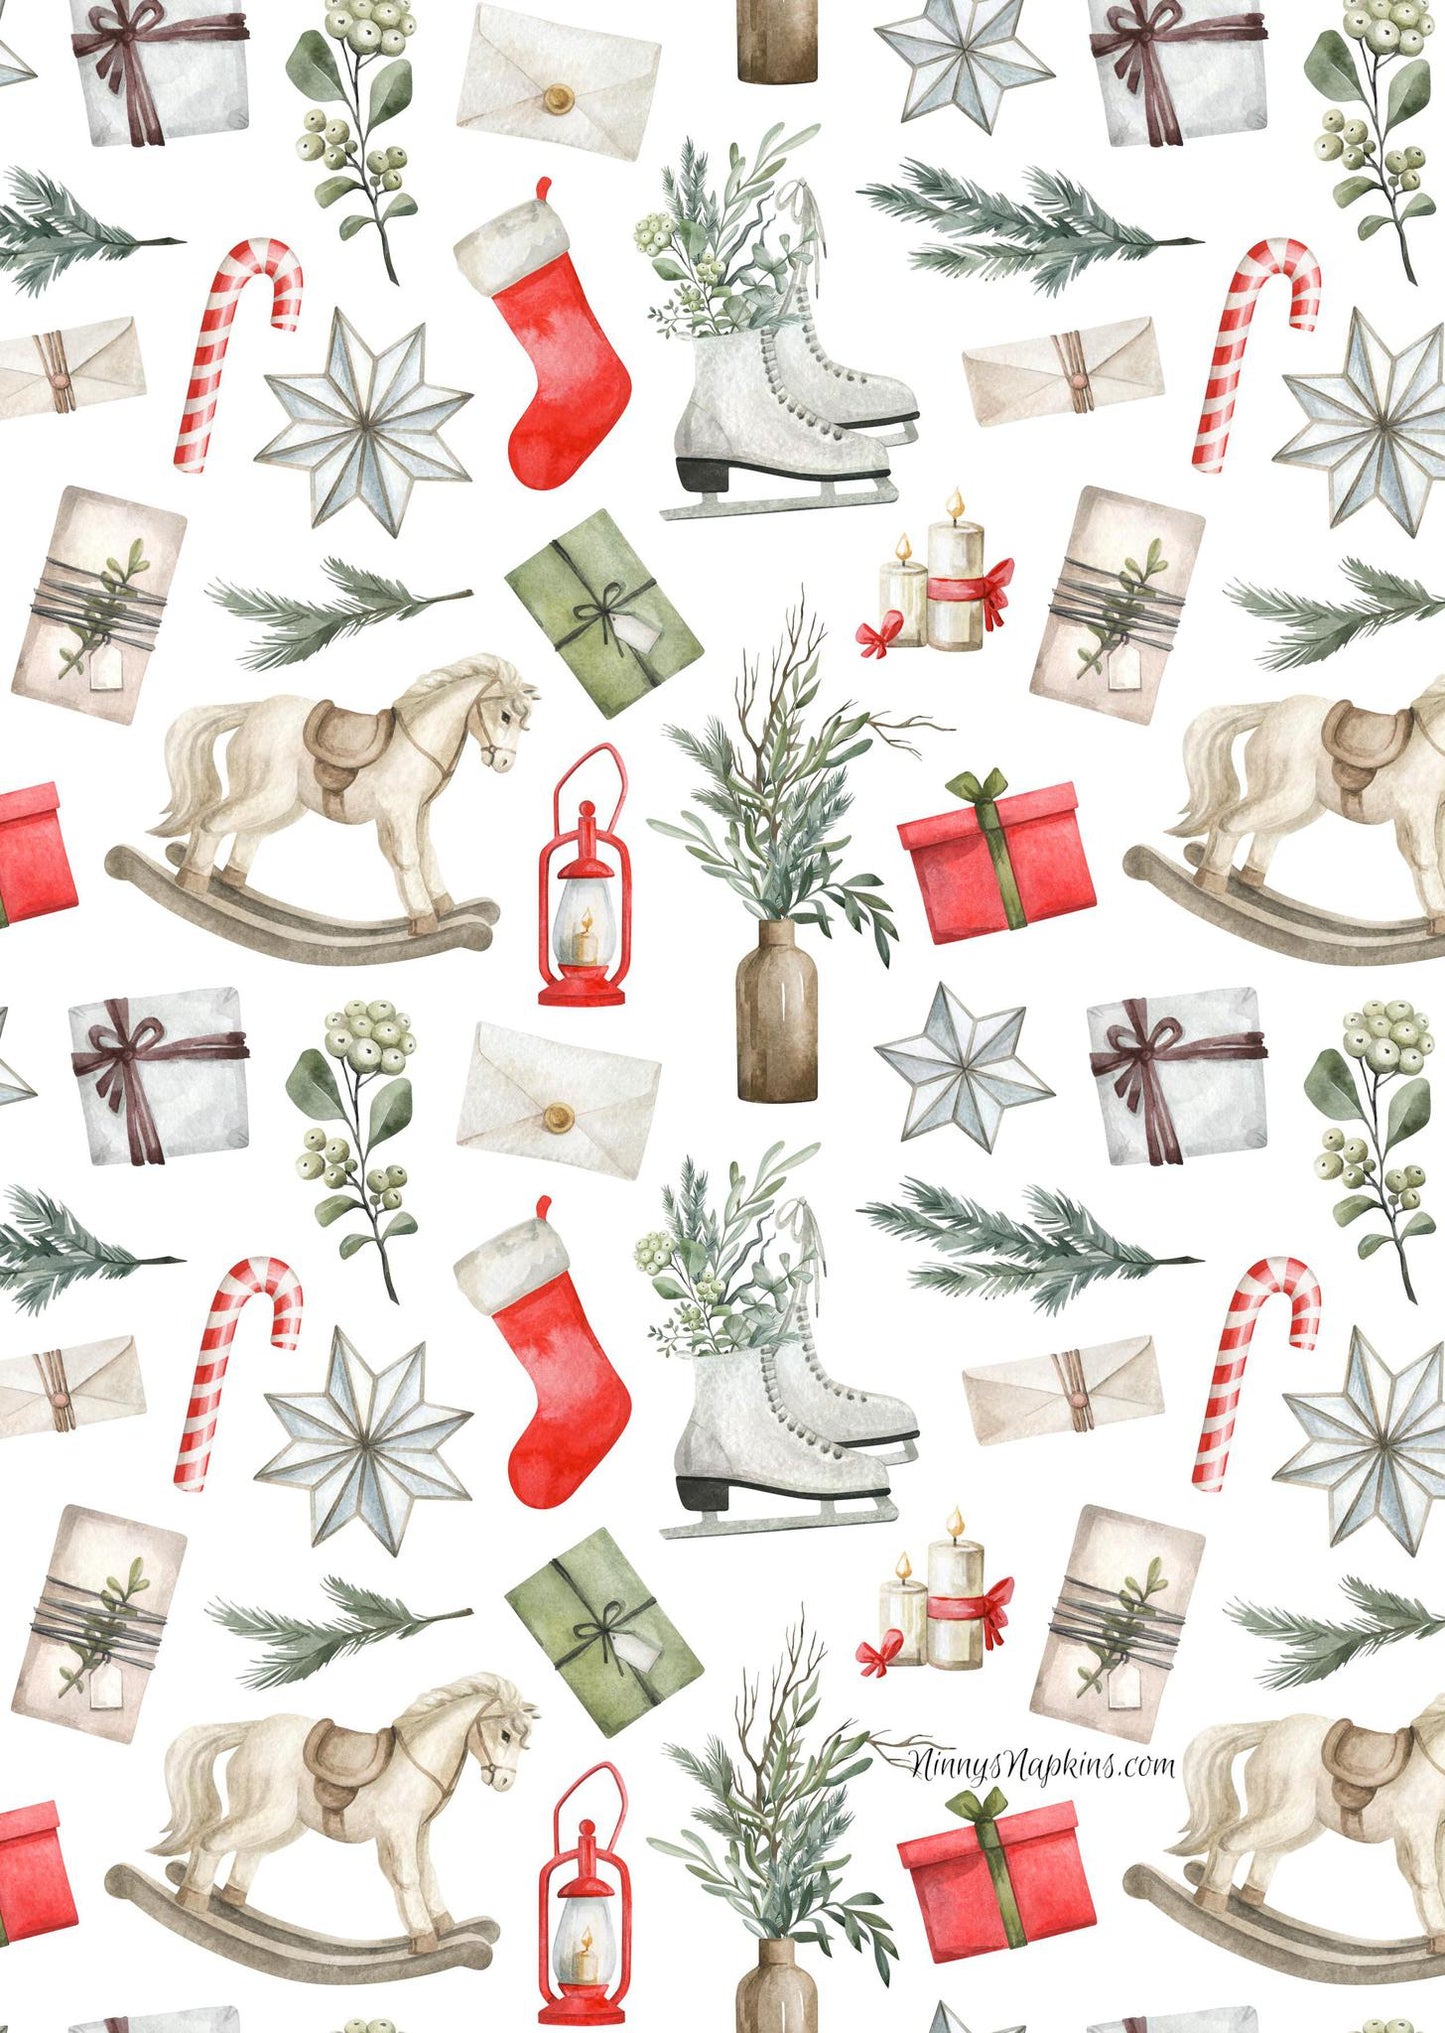 Ninny's Rice Paper A4 Value Pack of 8 - Christmas Patterns